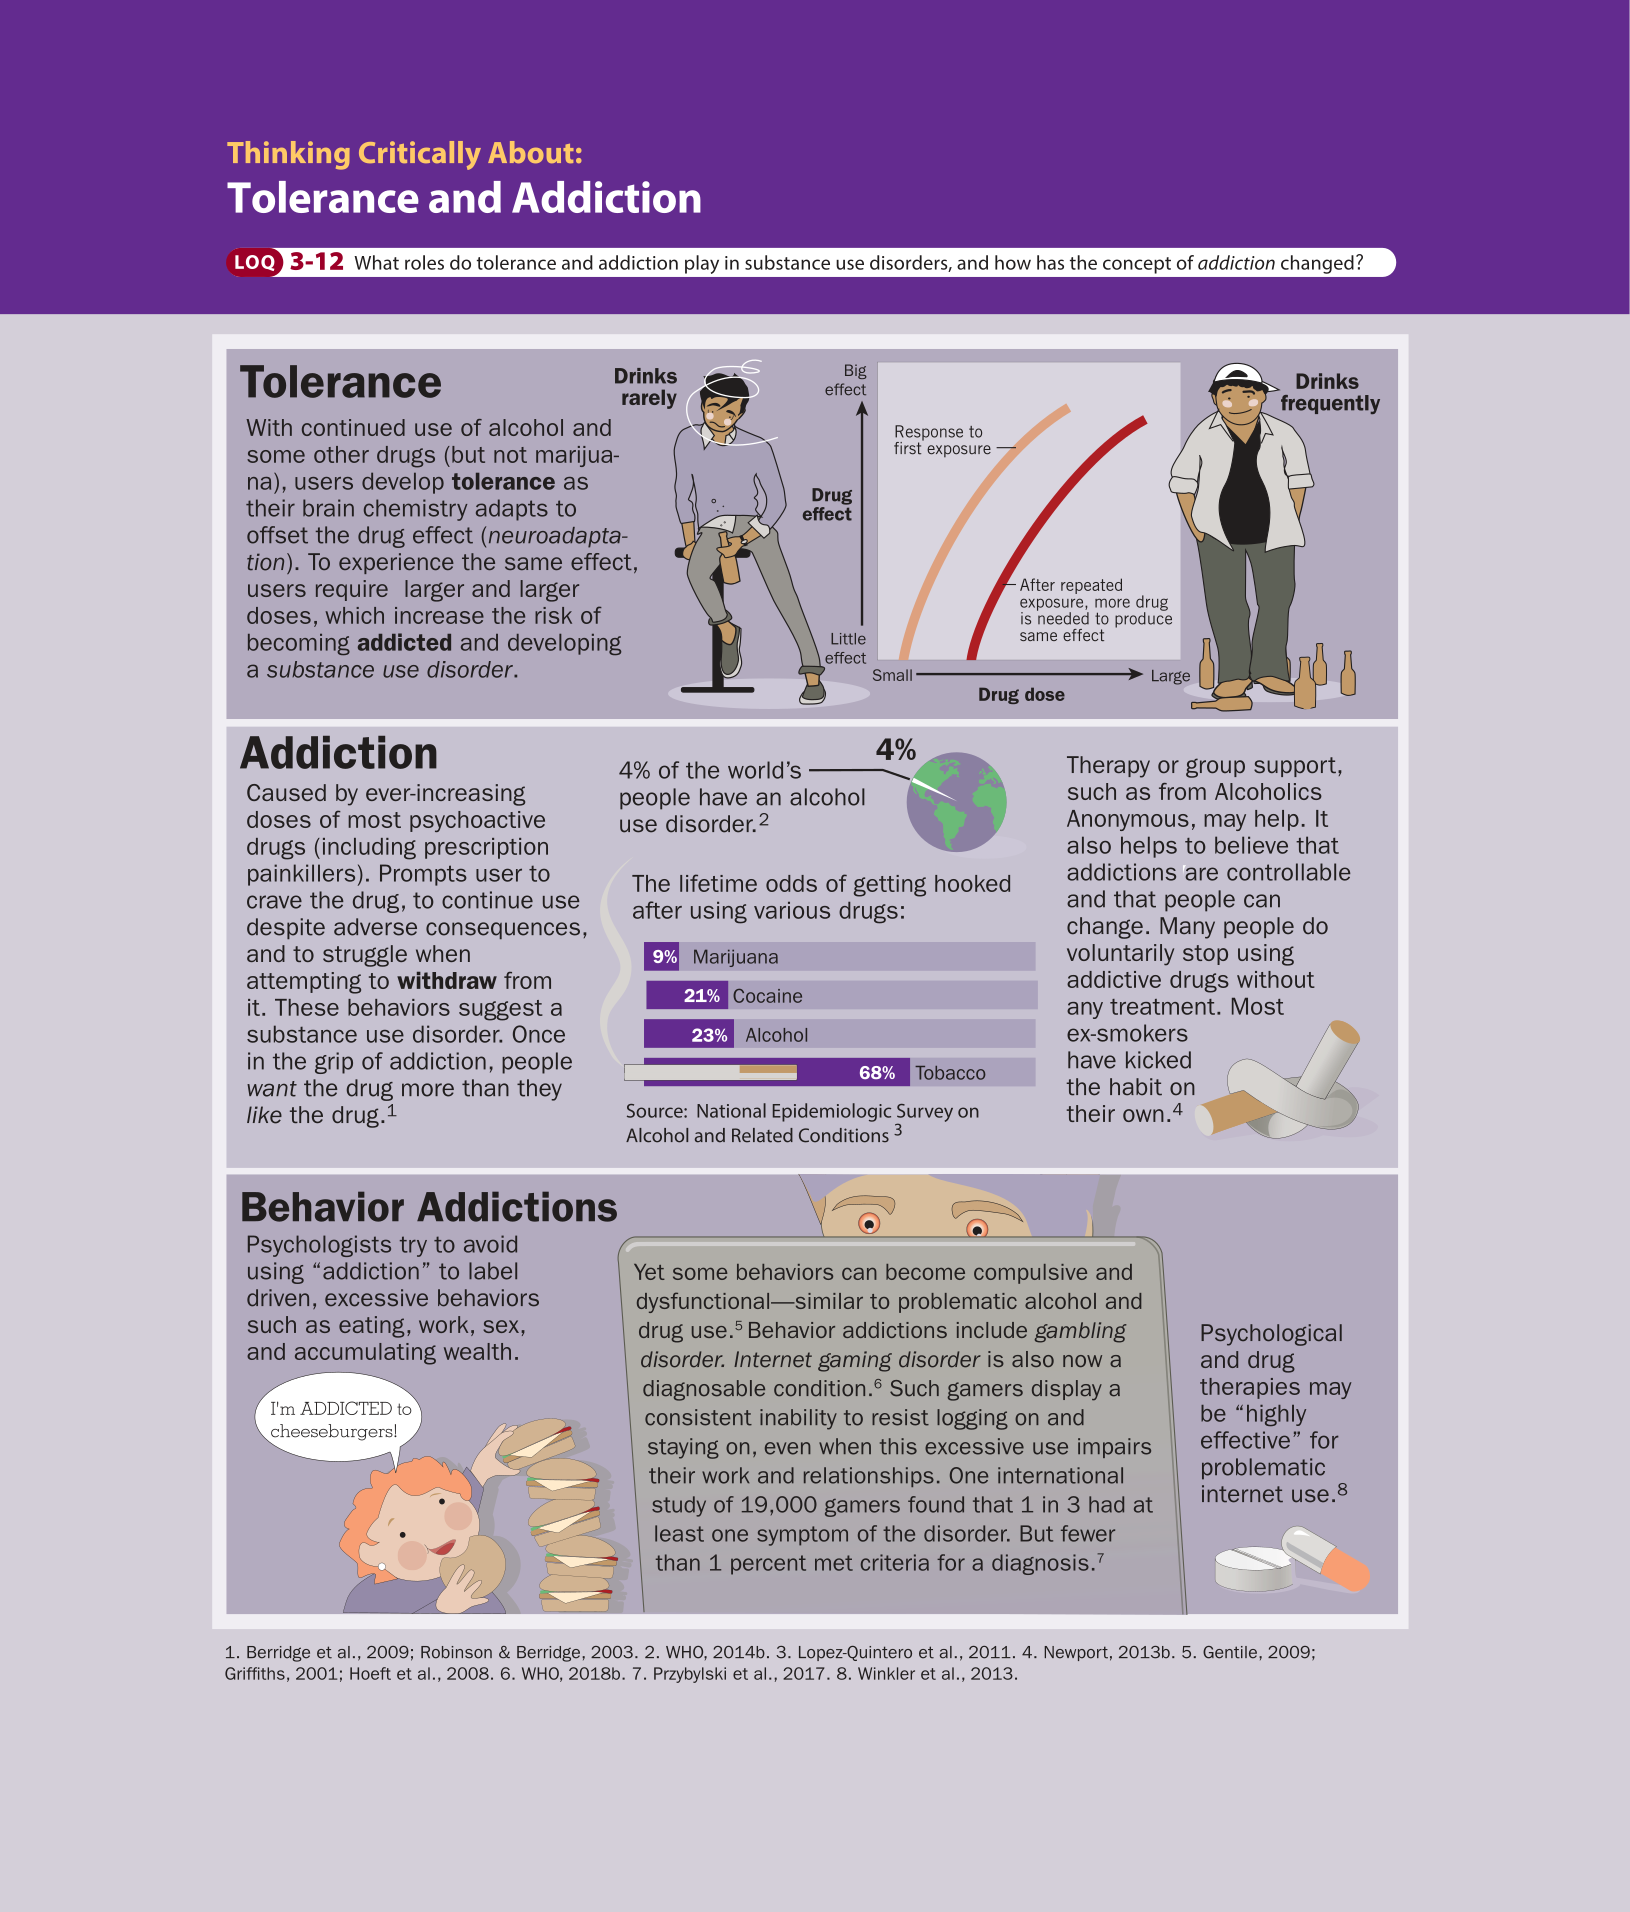 An illustration lists the causes and effects of tolerance, addiction and behavior addictions. You can read full description from the link below